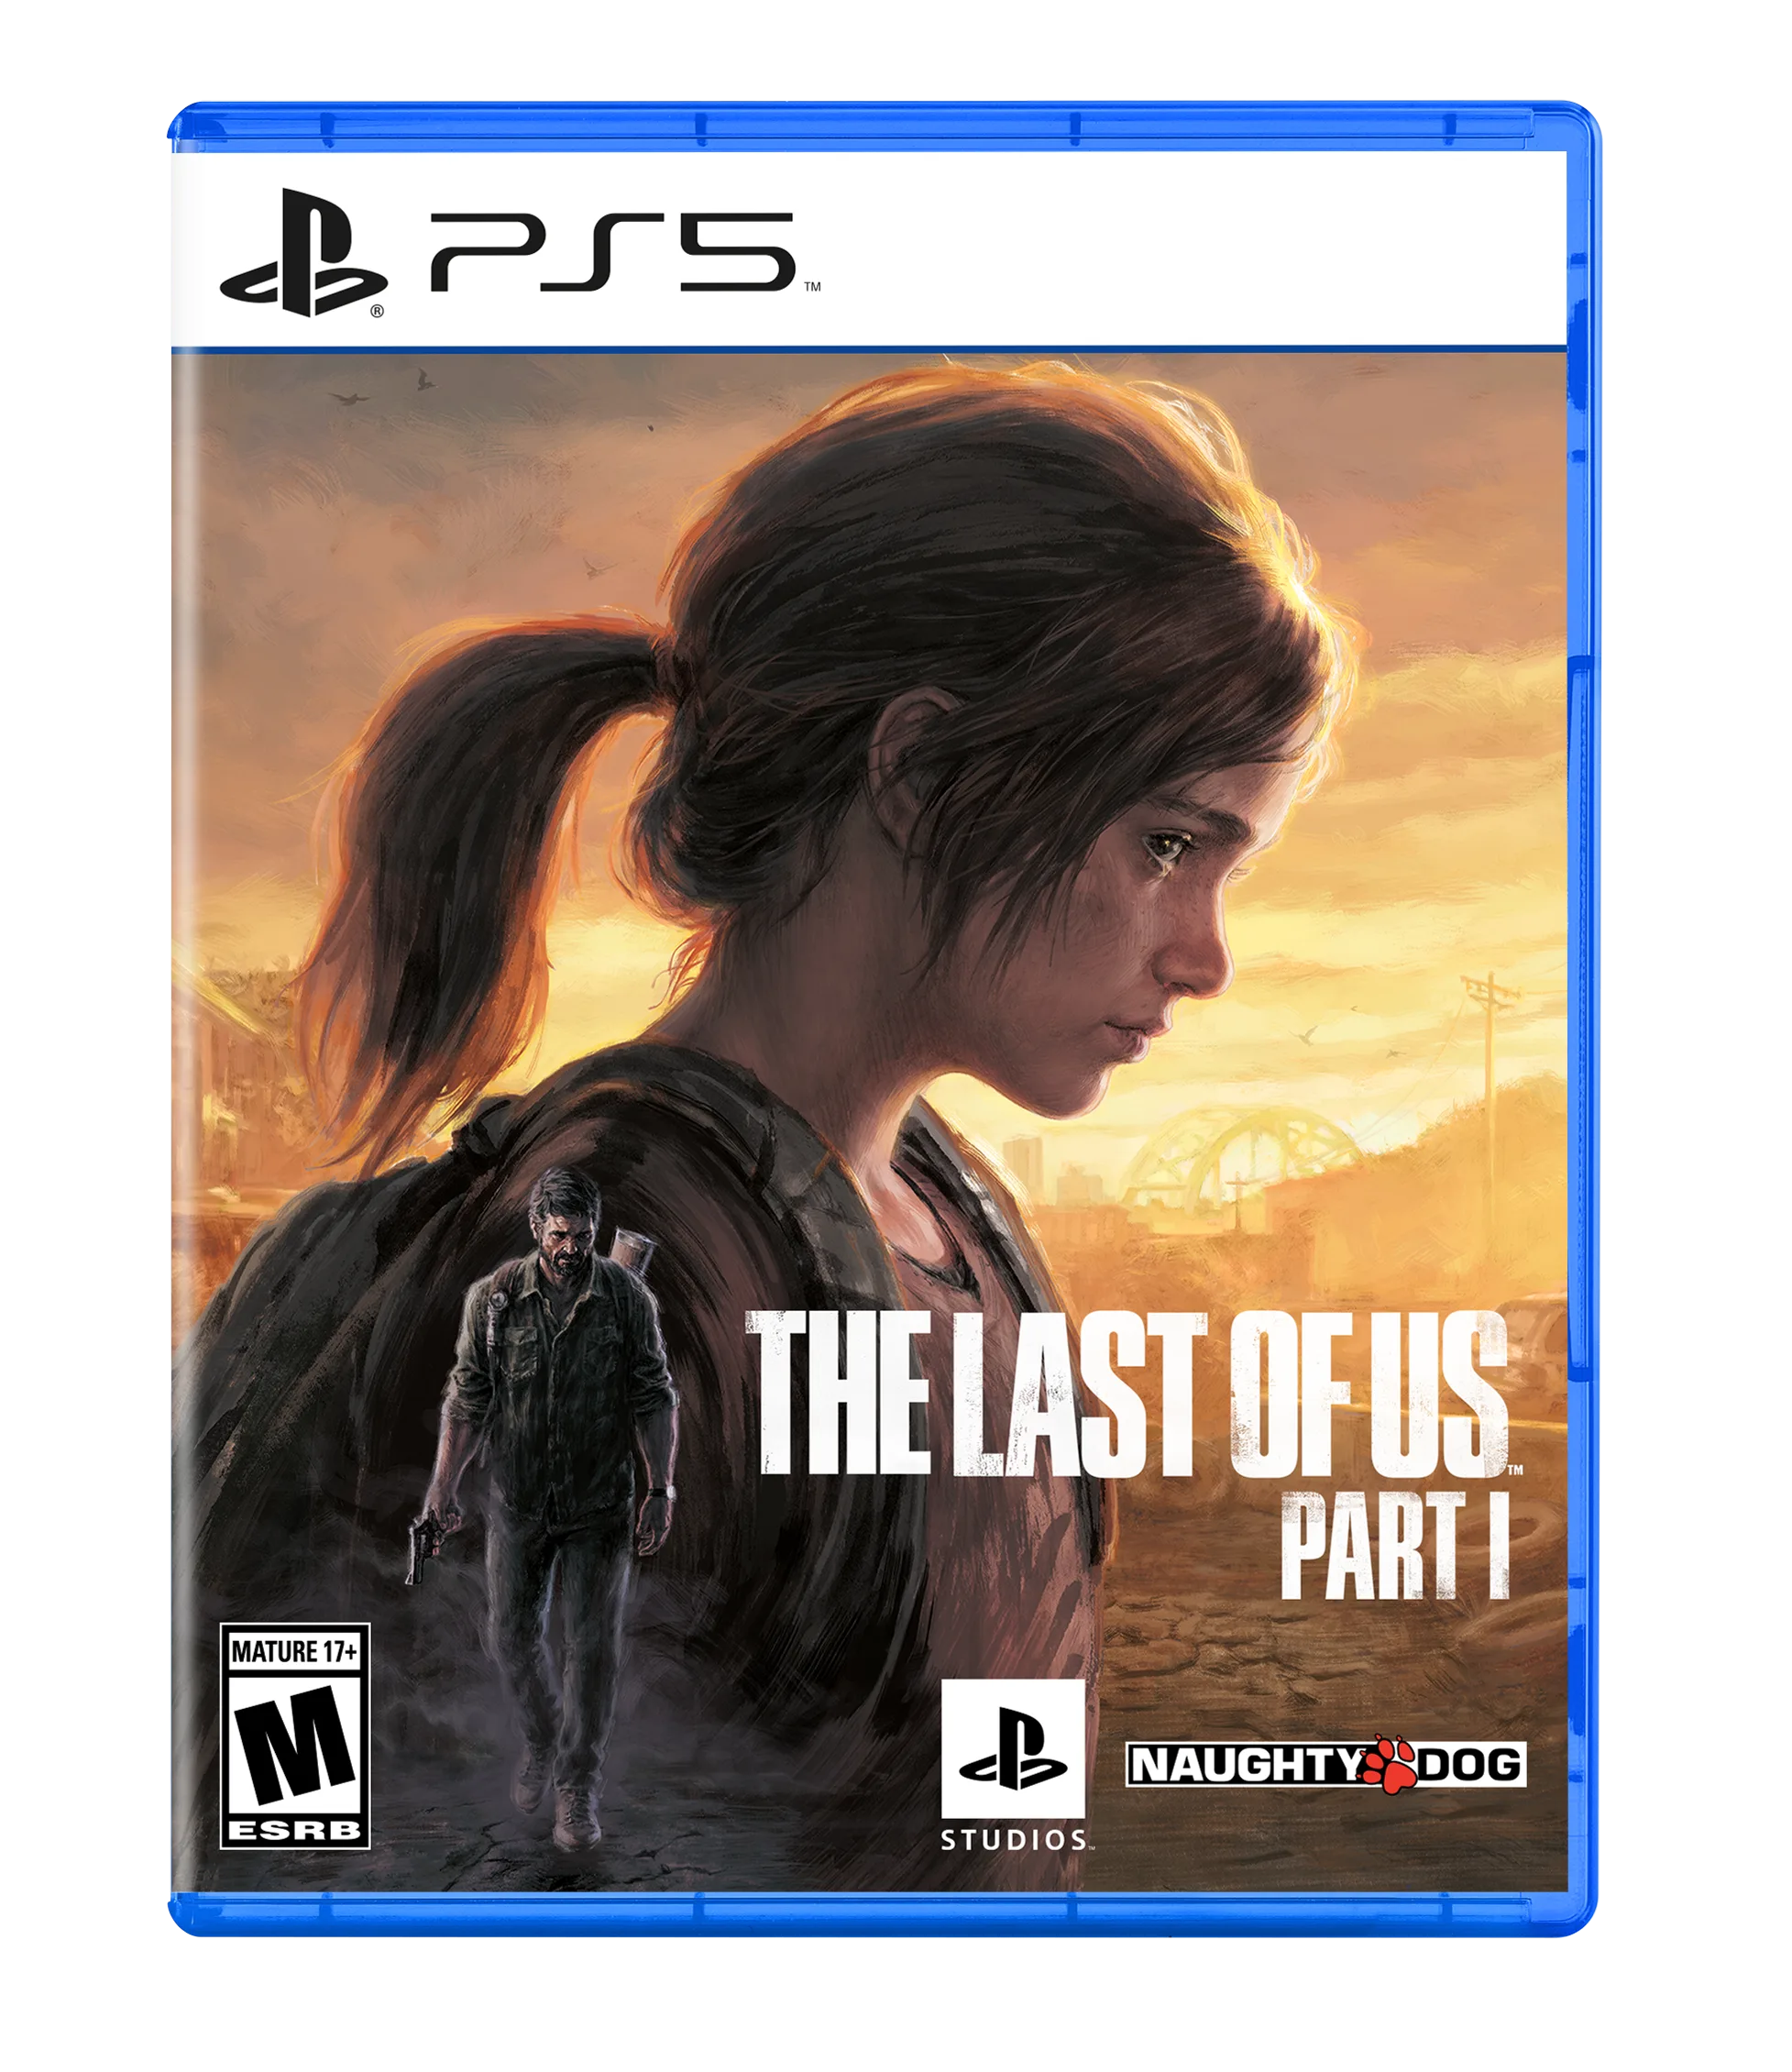 The Last of Us Part I COVER